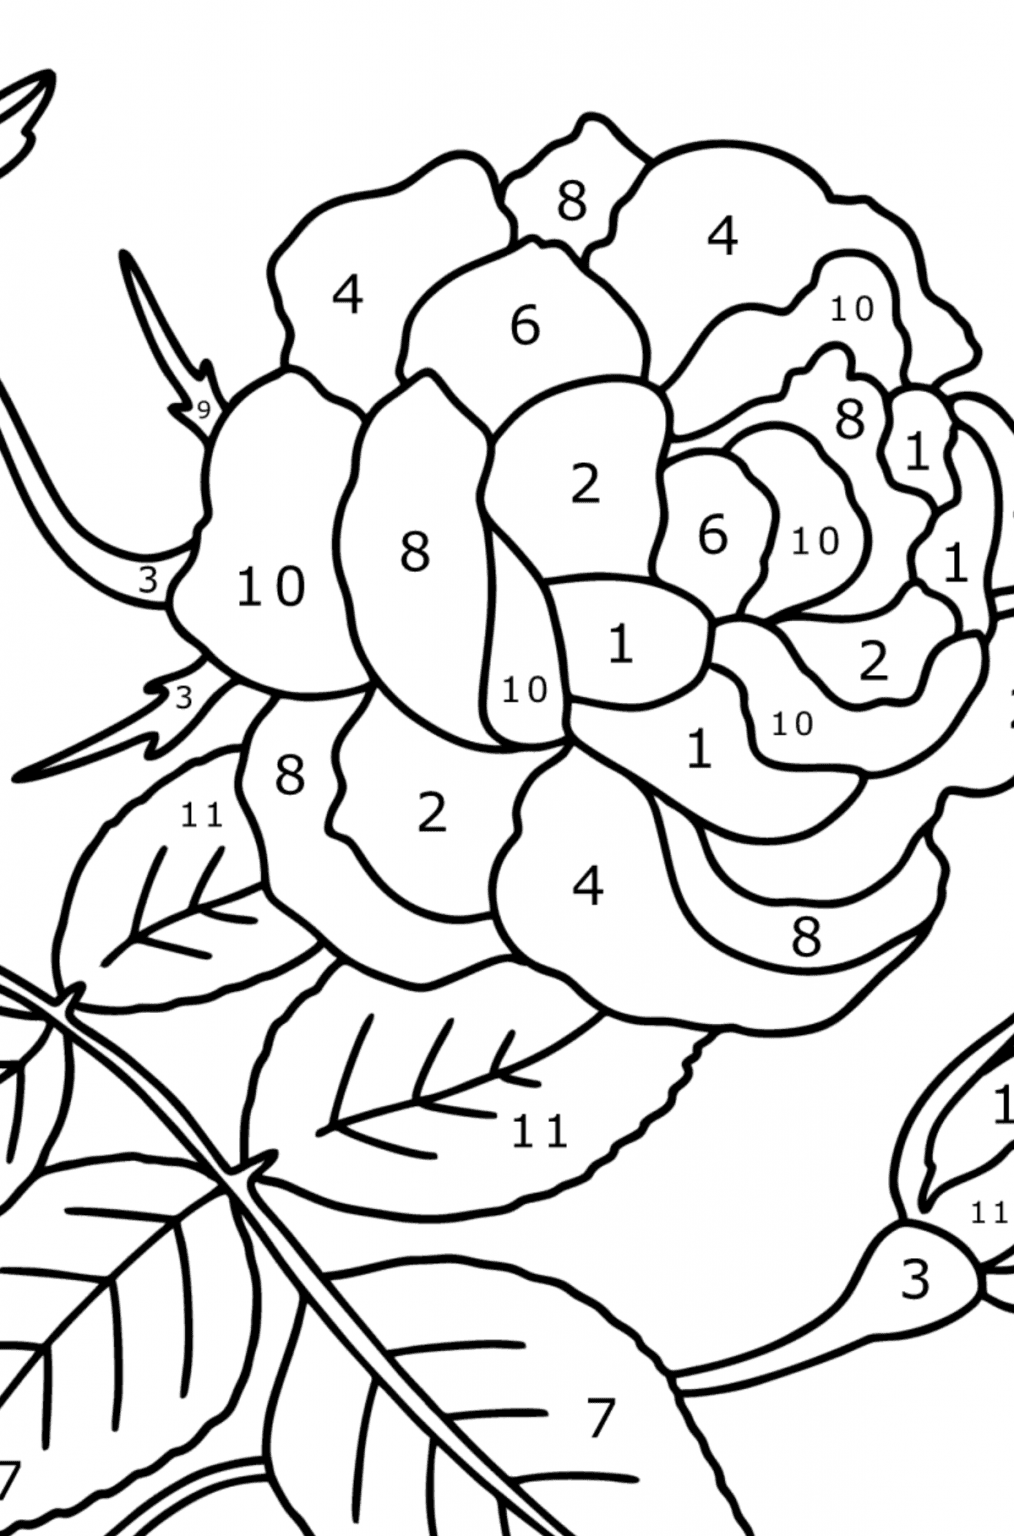 Climbing rose red coloring page ♥ Online and Print for Free!